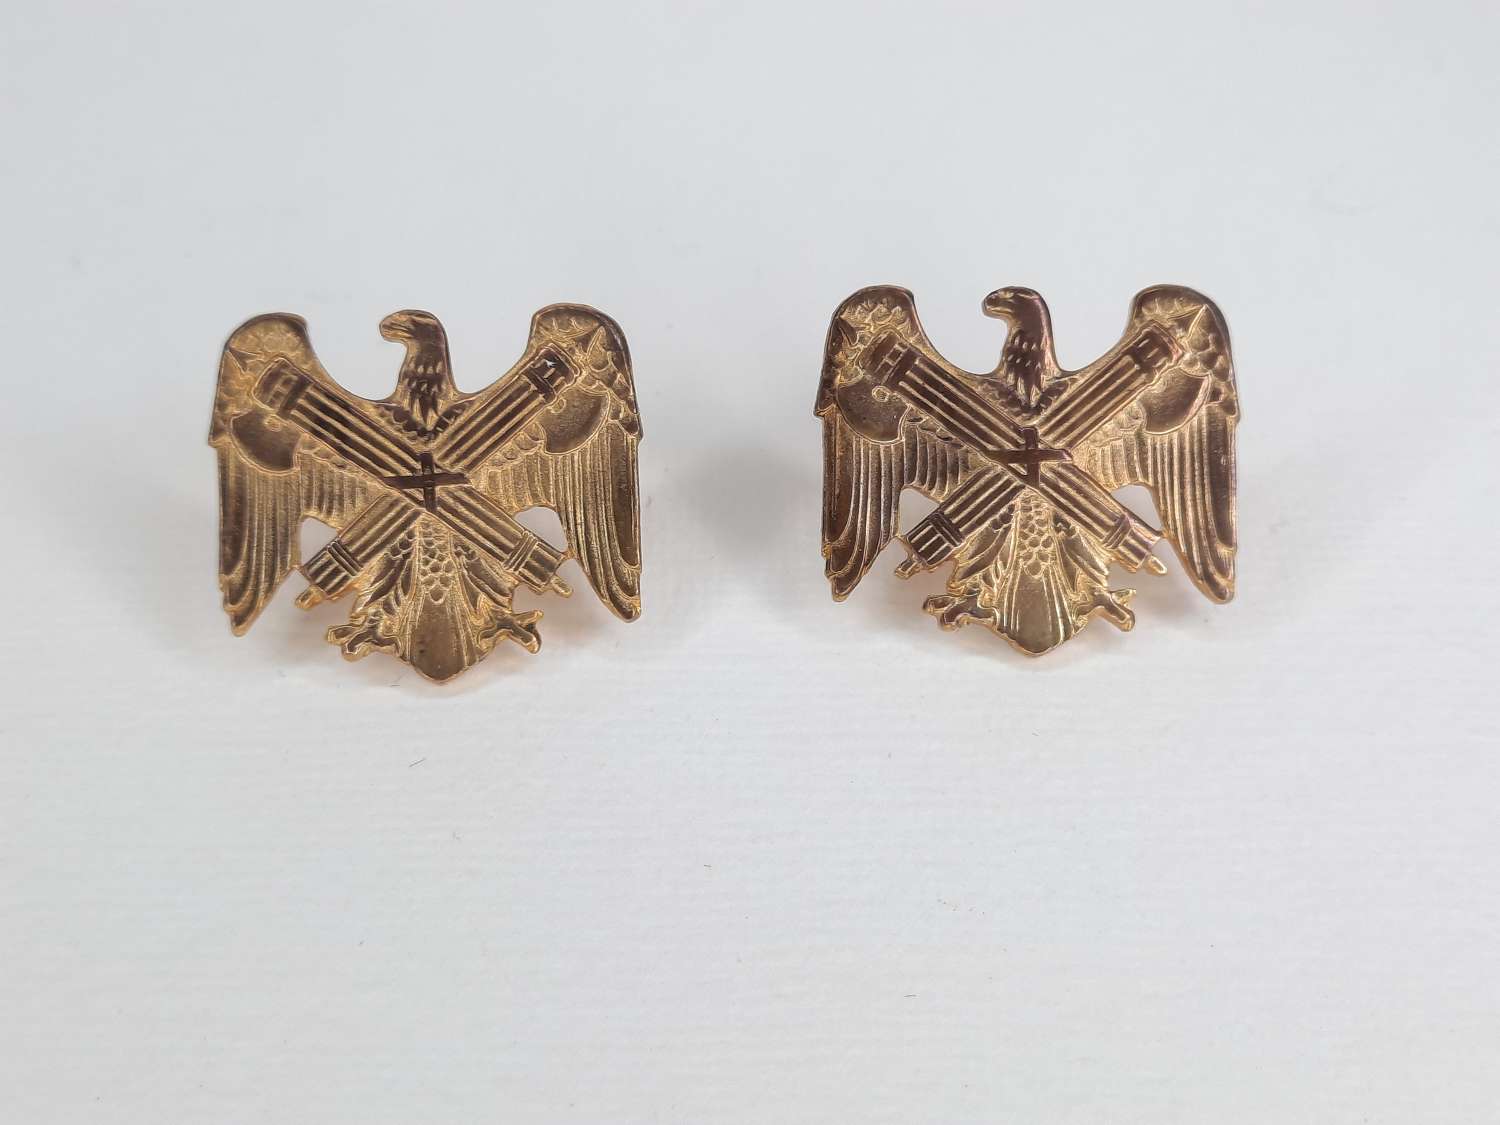 US Army National Guard Bureau Officer's Collar Devices